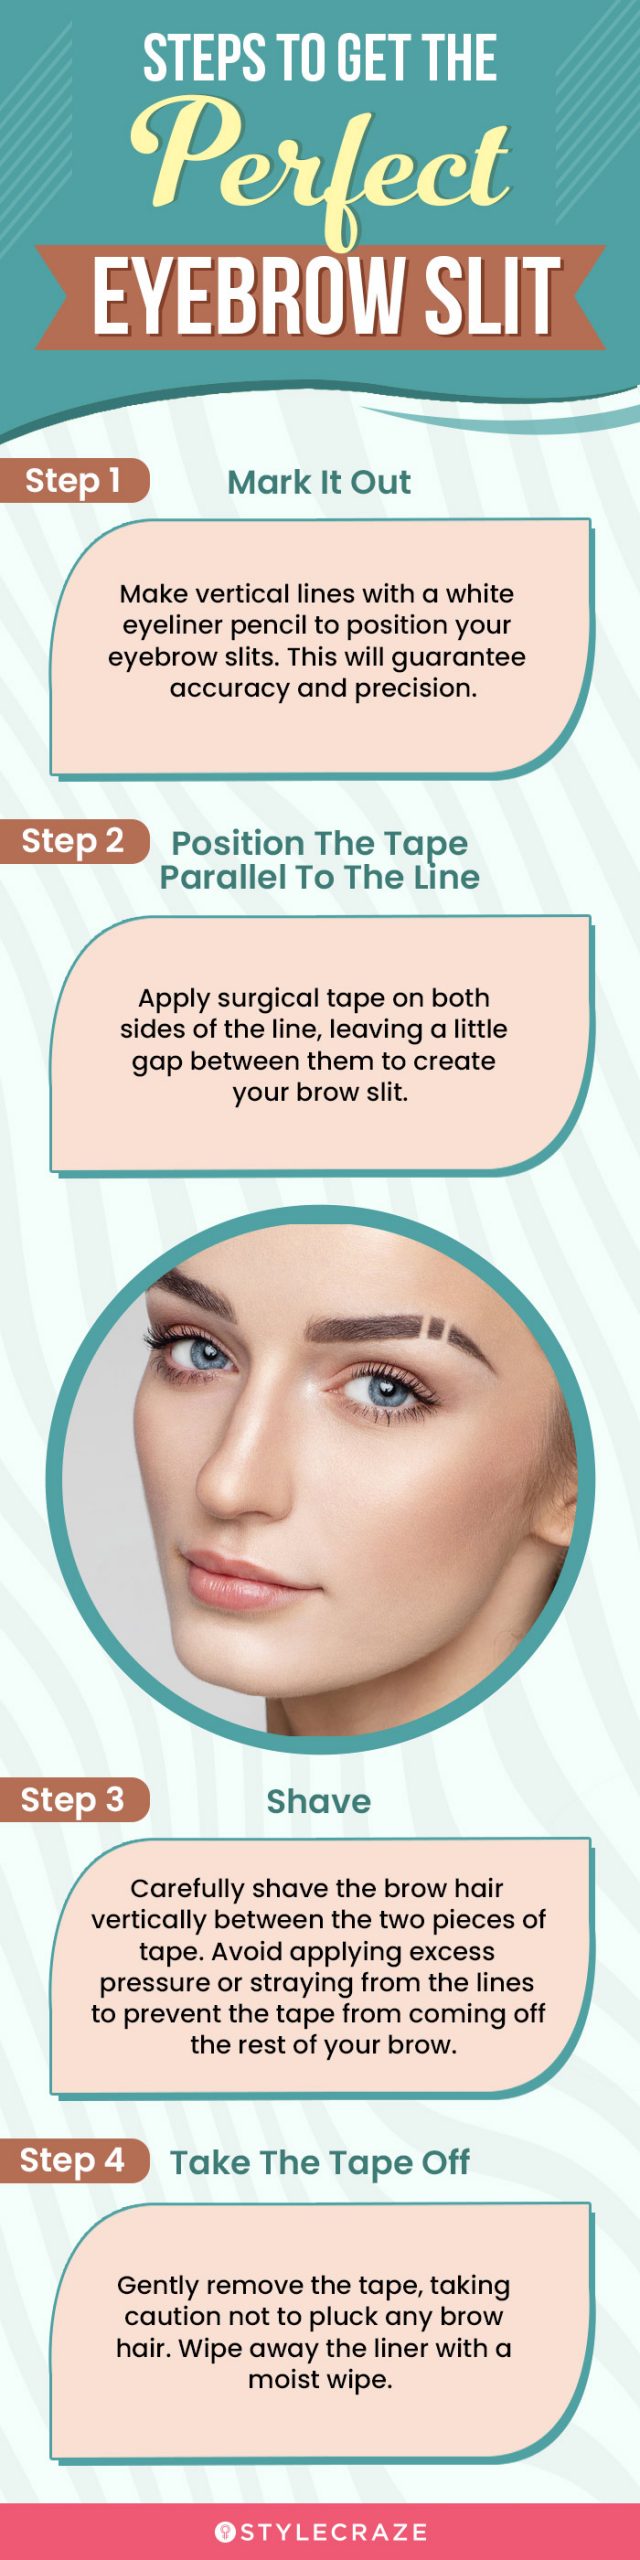 steps to get the perfect eyebrow slit (infographic)